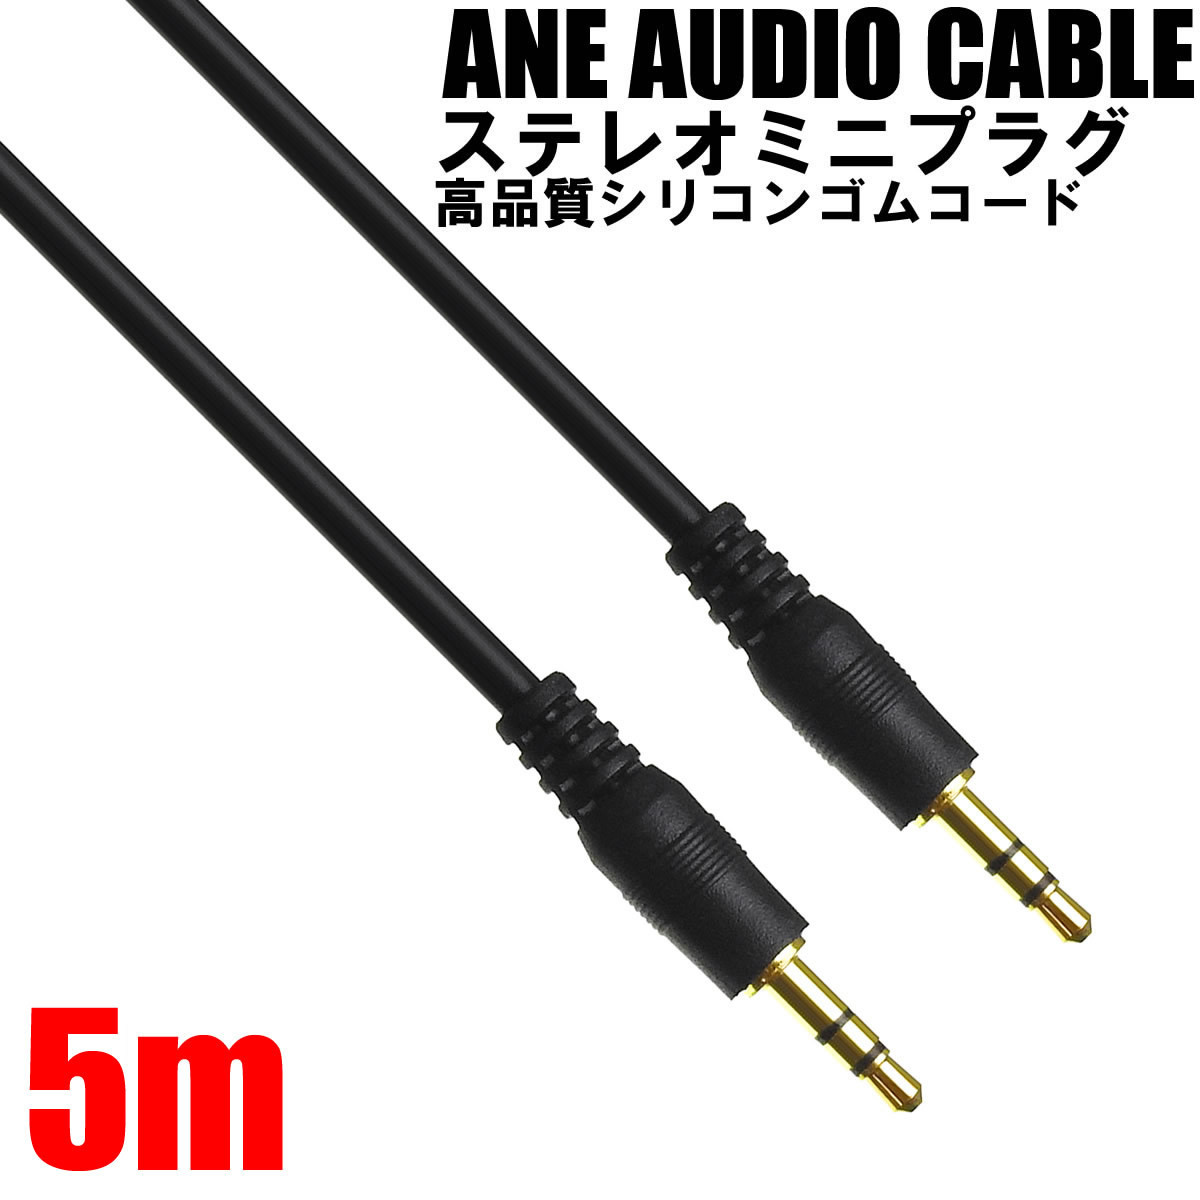 ANE stereo Mini plug cable 500cm(5m) black high quality silicon rubber [ male male ] code diameter approximately 3.8mm 3 ultimate AUX audio cable 